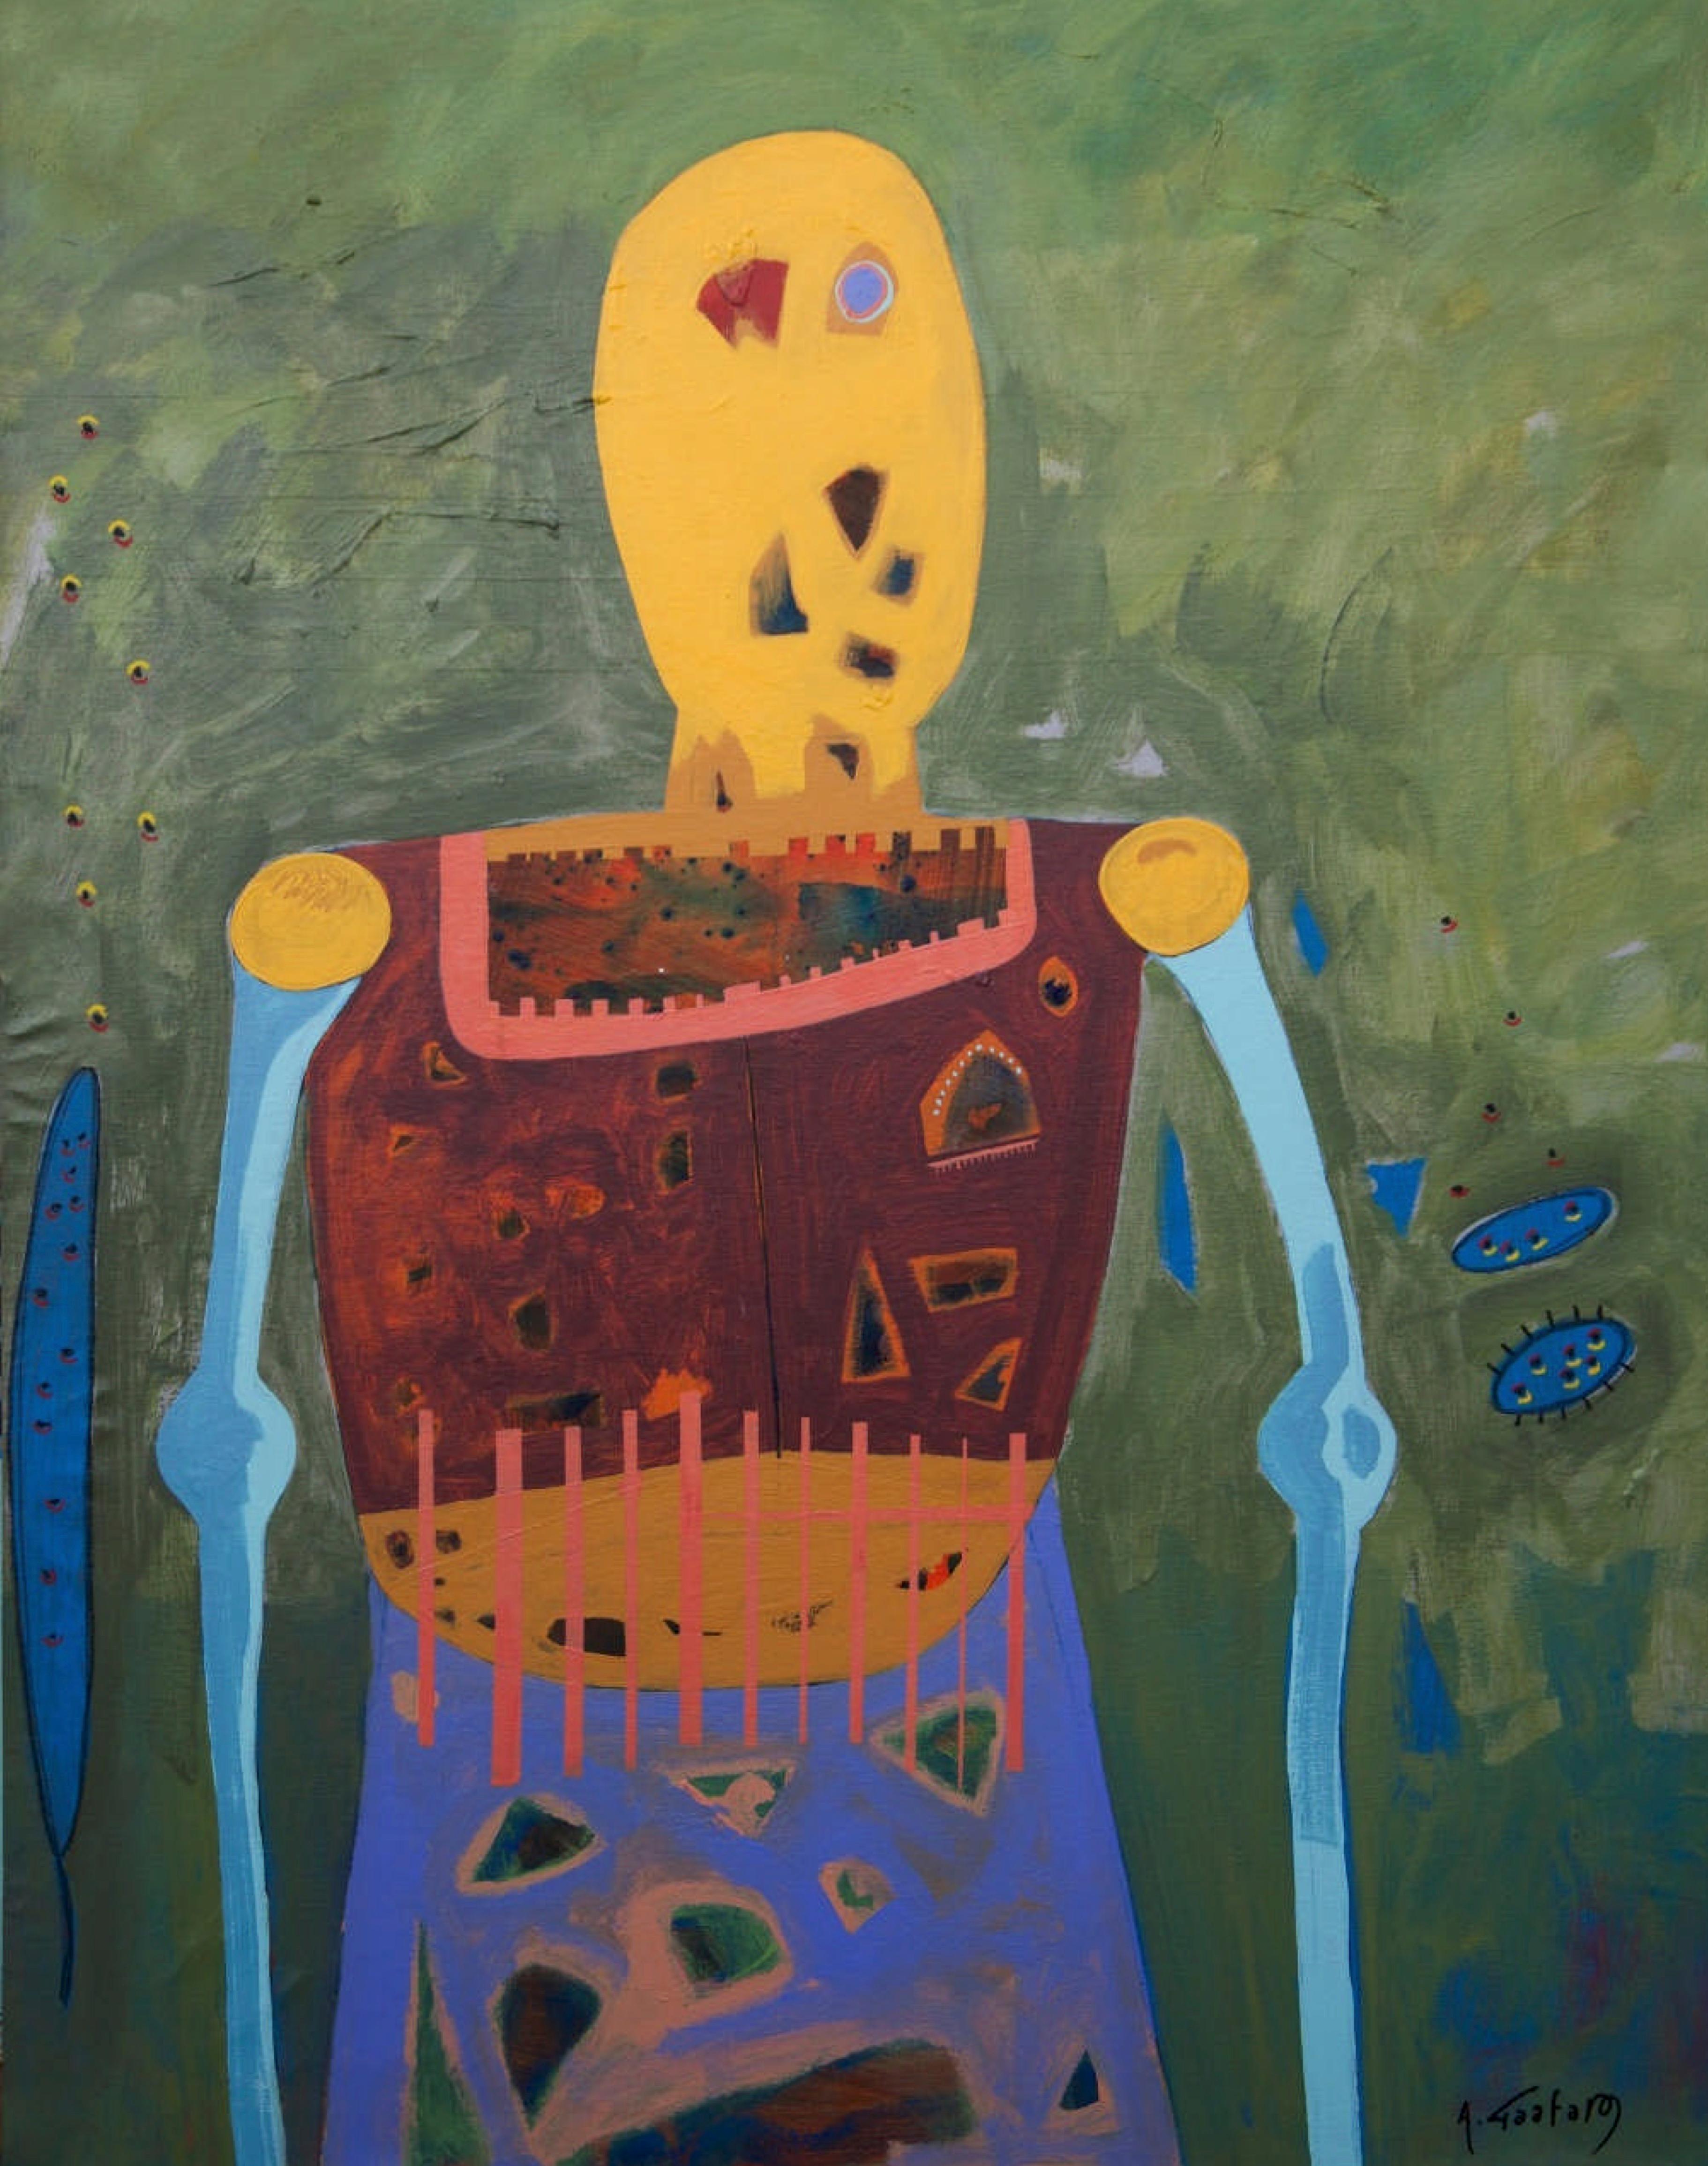 "Bionic Figure I" Acrylic & Oil pastel Painting 47" x 37" inch by Ahmed Gaafary

Born In Cairo 1987 Where He Currently Lives And Works. He Received His Bachelor’s Degree In Information Systems In 2008 From The Higher Institute Of Advanced Studies